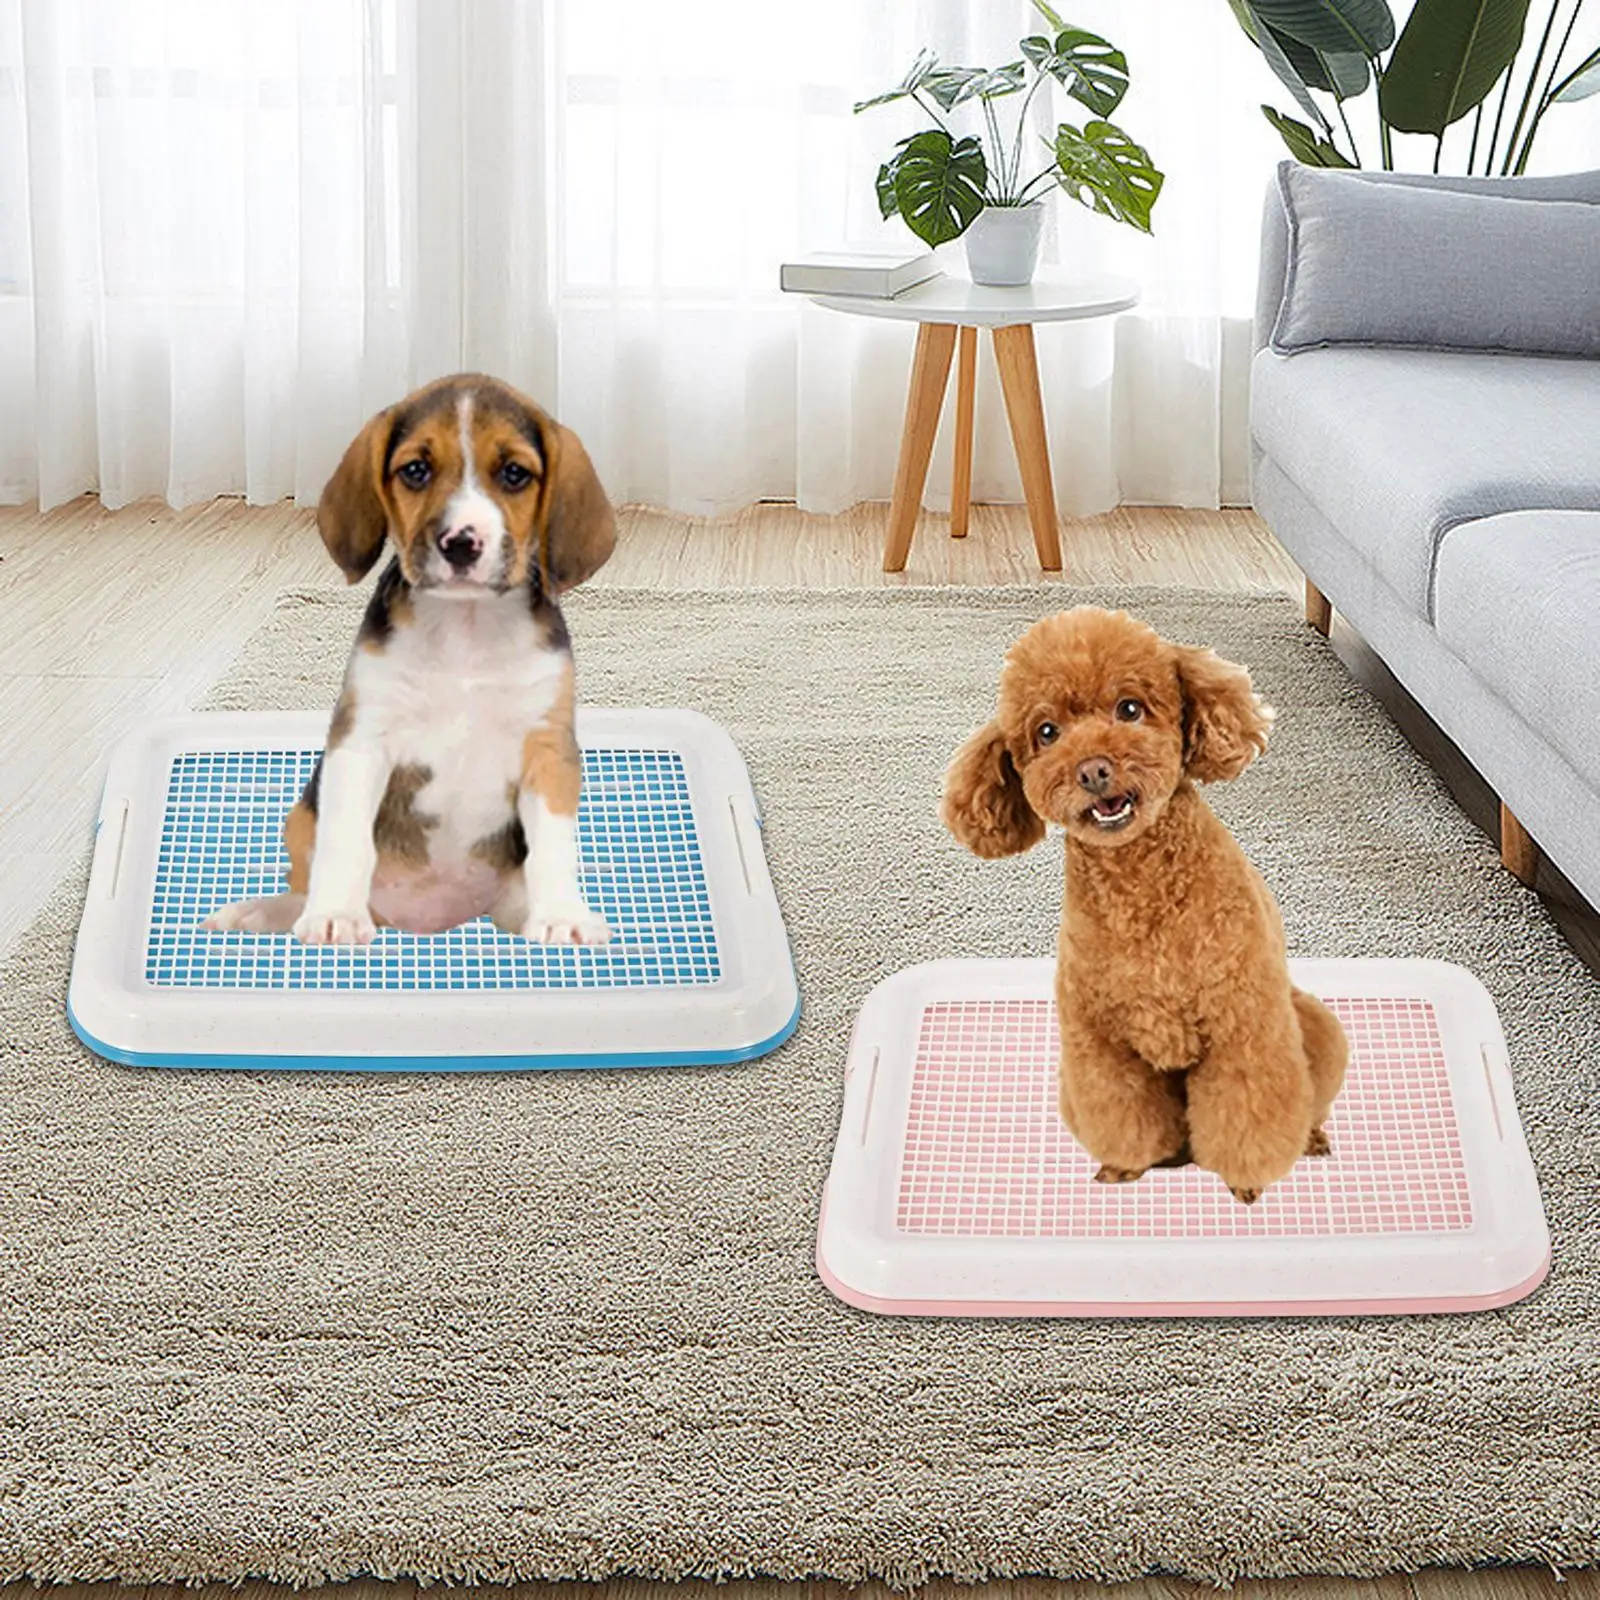 Dog Potty Toilet Training Tray Potty Trainer Corner for Puppies Small Dogs